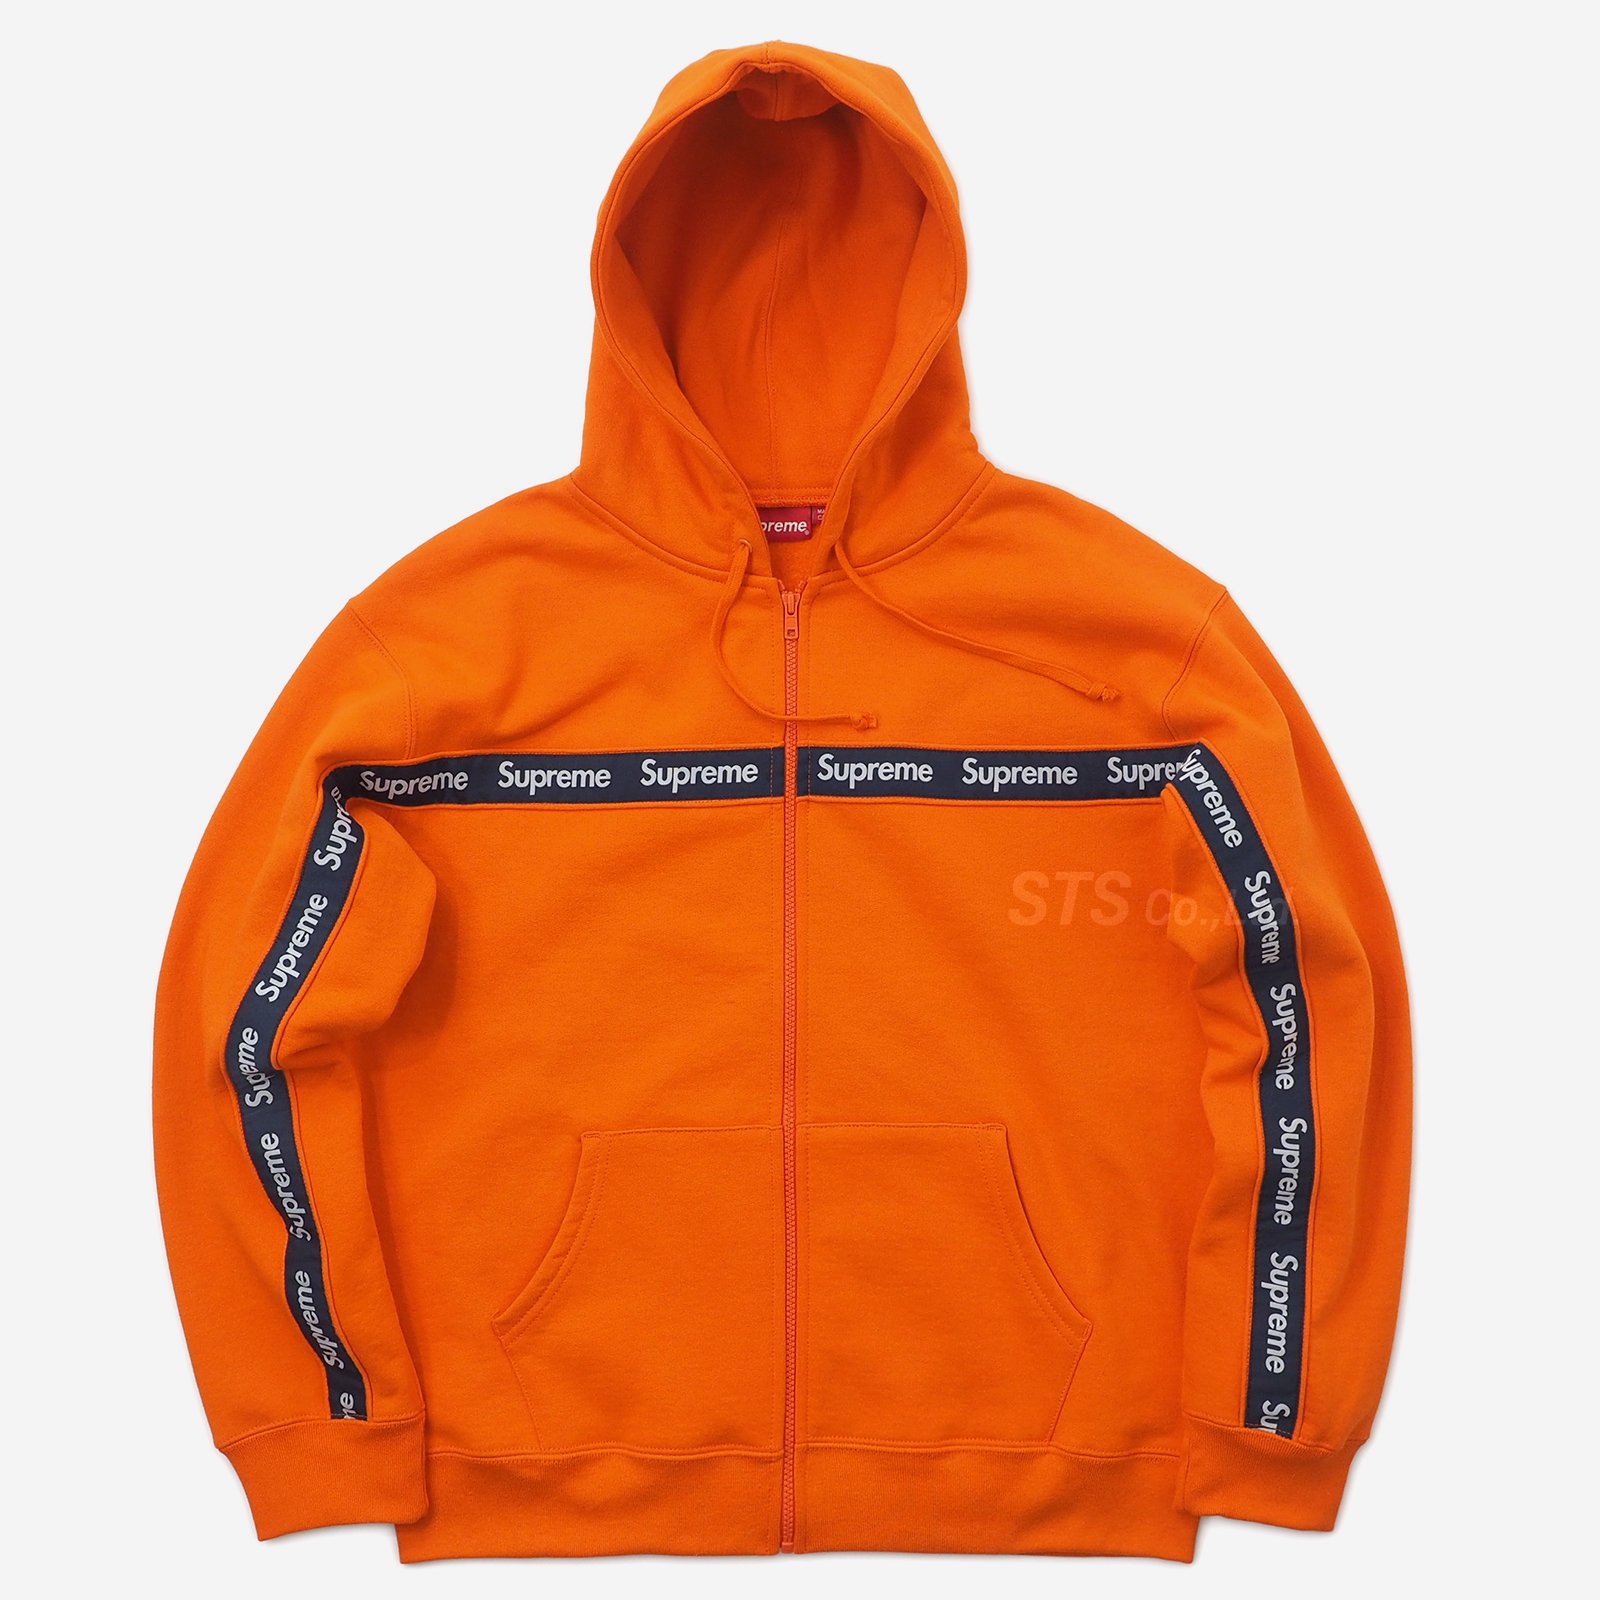 Supreme Text Stripe Zip Up Hooded